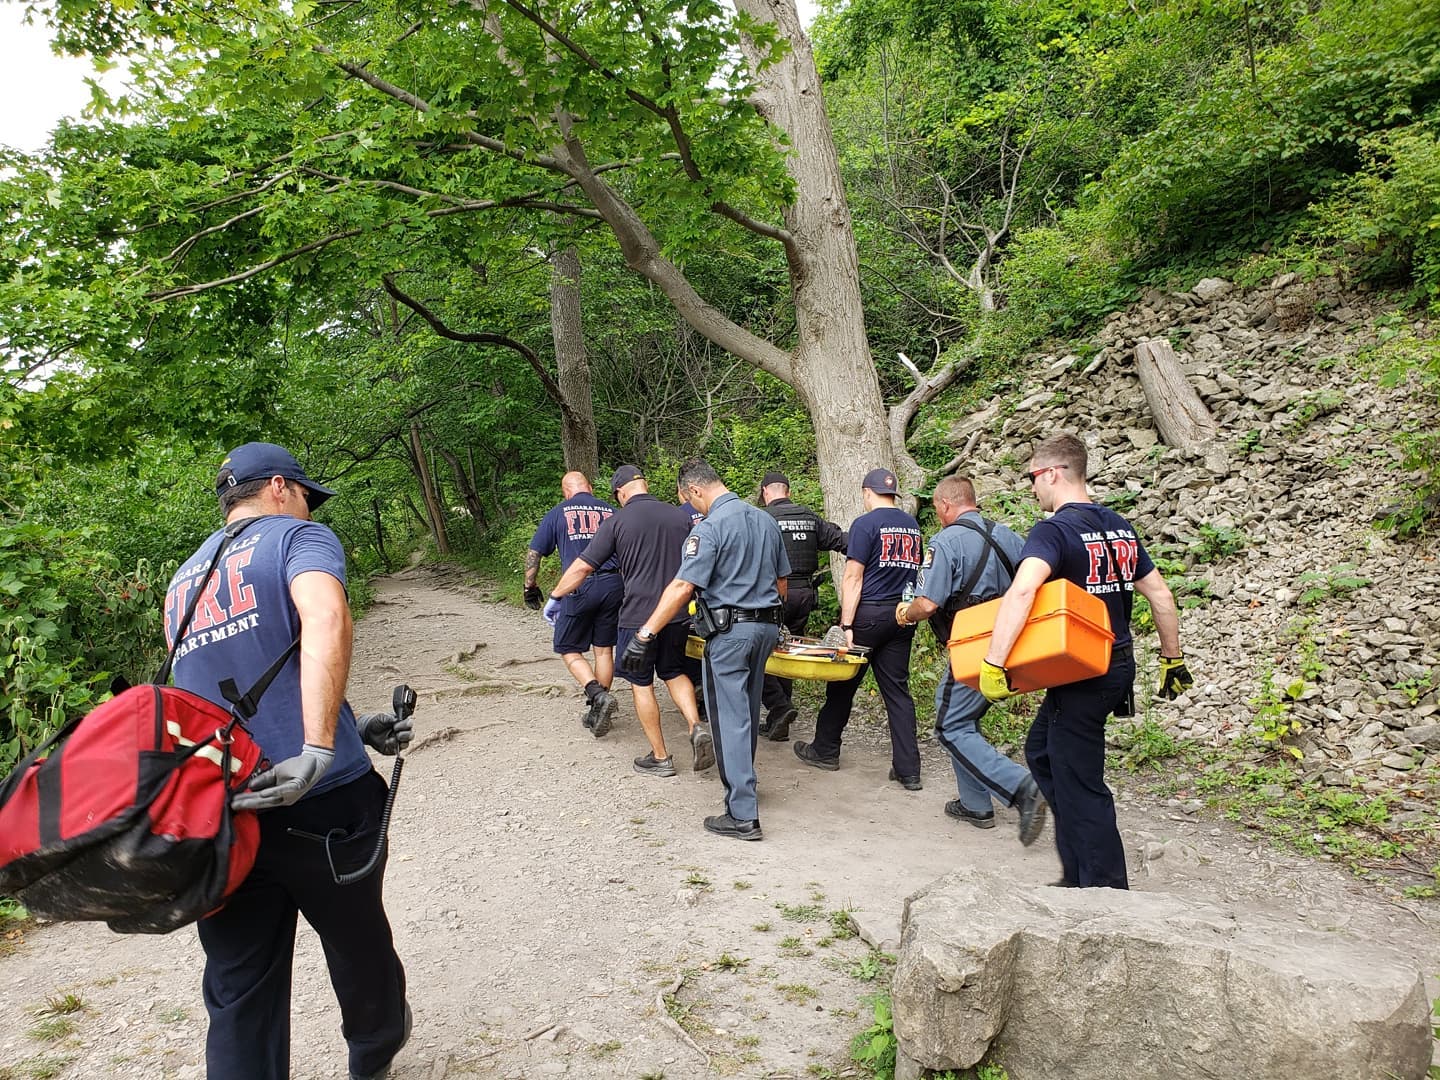 New York State Park Police officers are joined by members of the Niagara Falls Fire Department in executing a carryout rescue of an injured hiker from the Vanderbilt Stairs area of Whirlpool State Park on Sunday, Aug. 8. (Submitted photo)